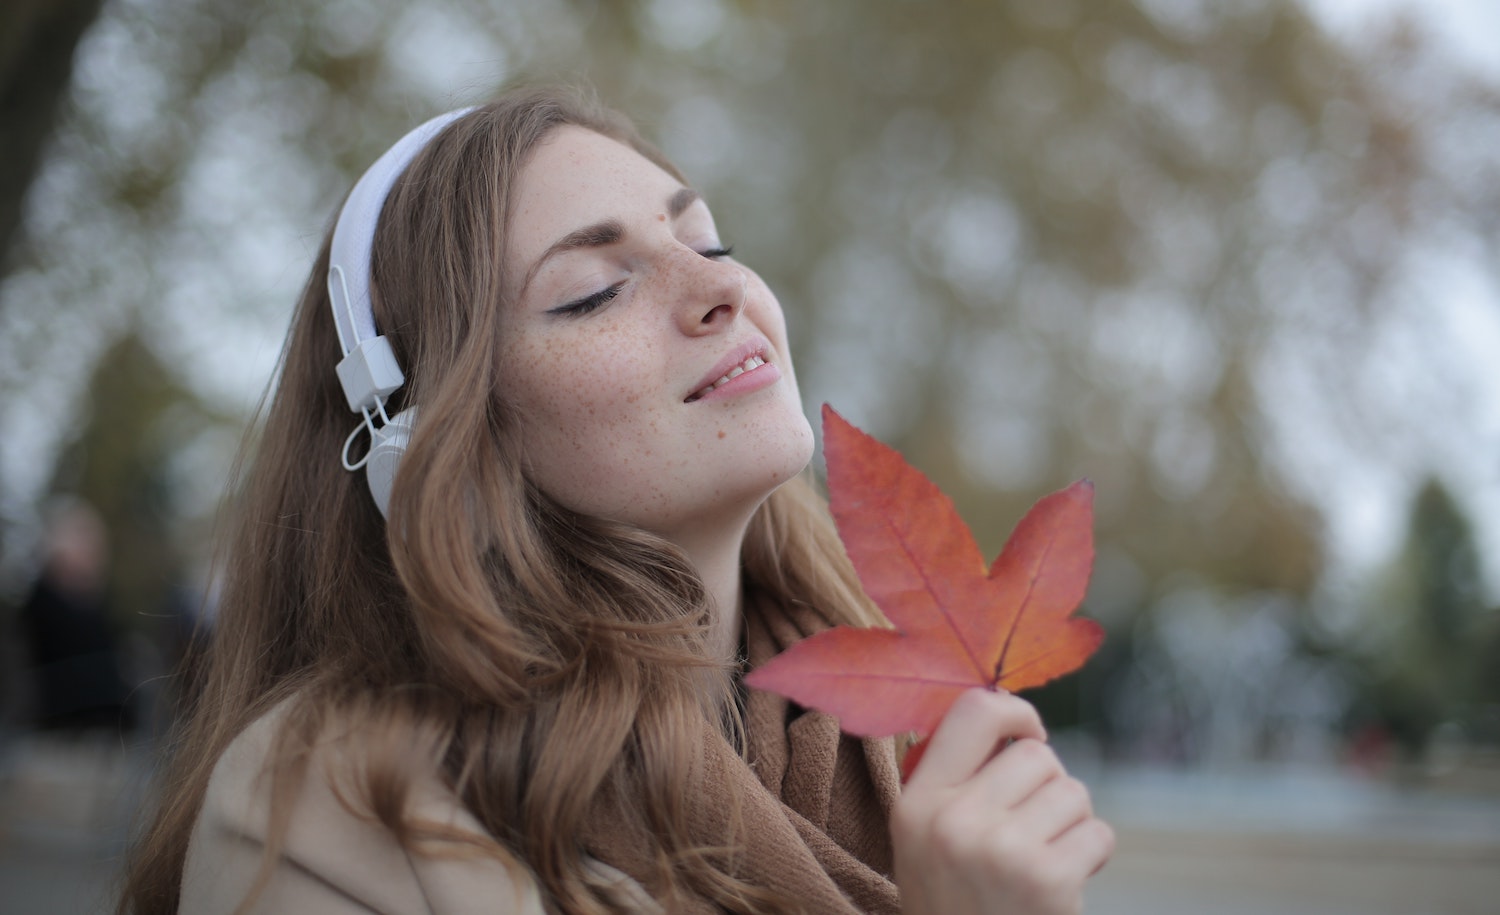 A sensitive person (woman) beaming with a big happy smile and holding an autumn leaf to her face.